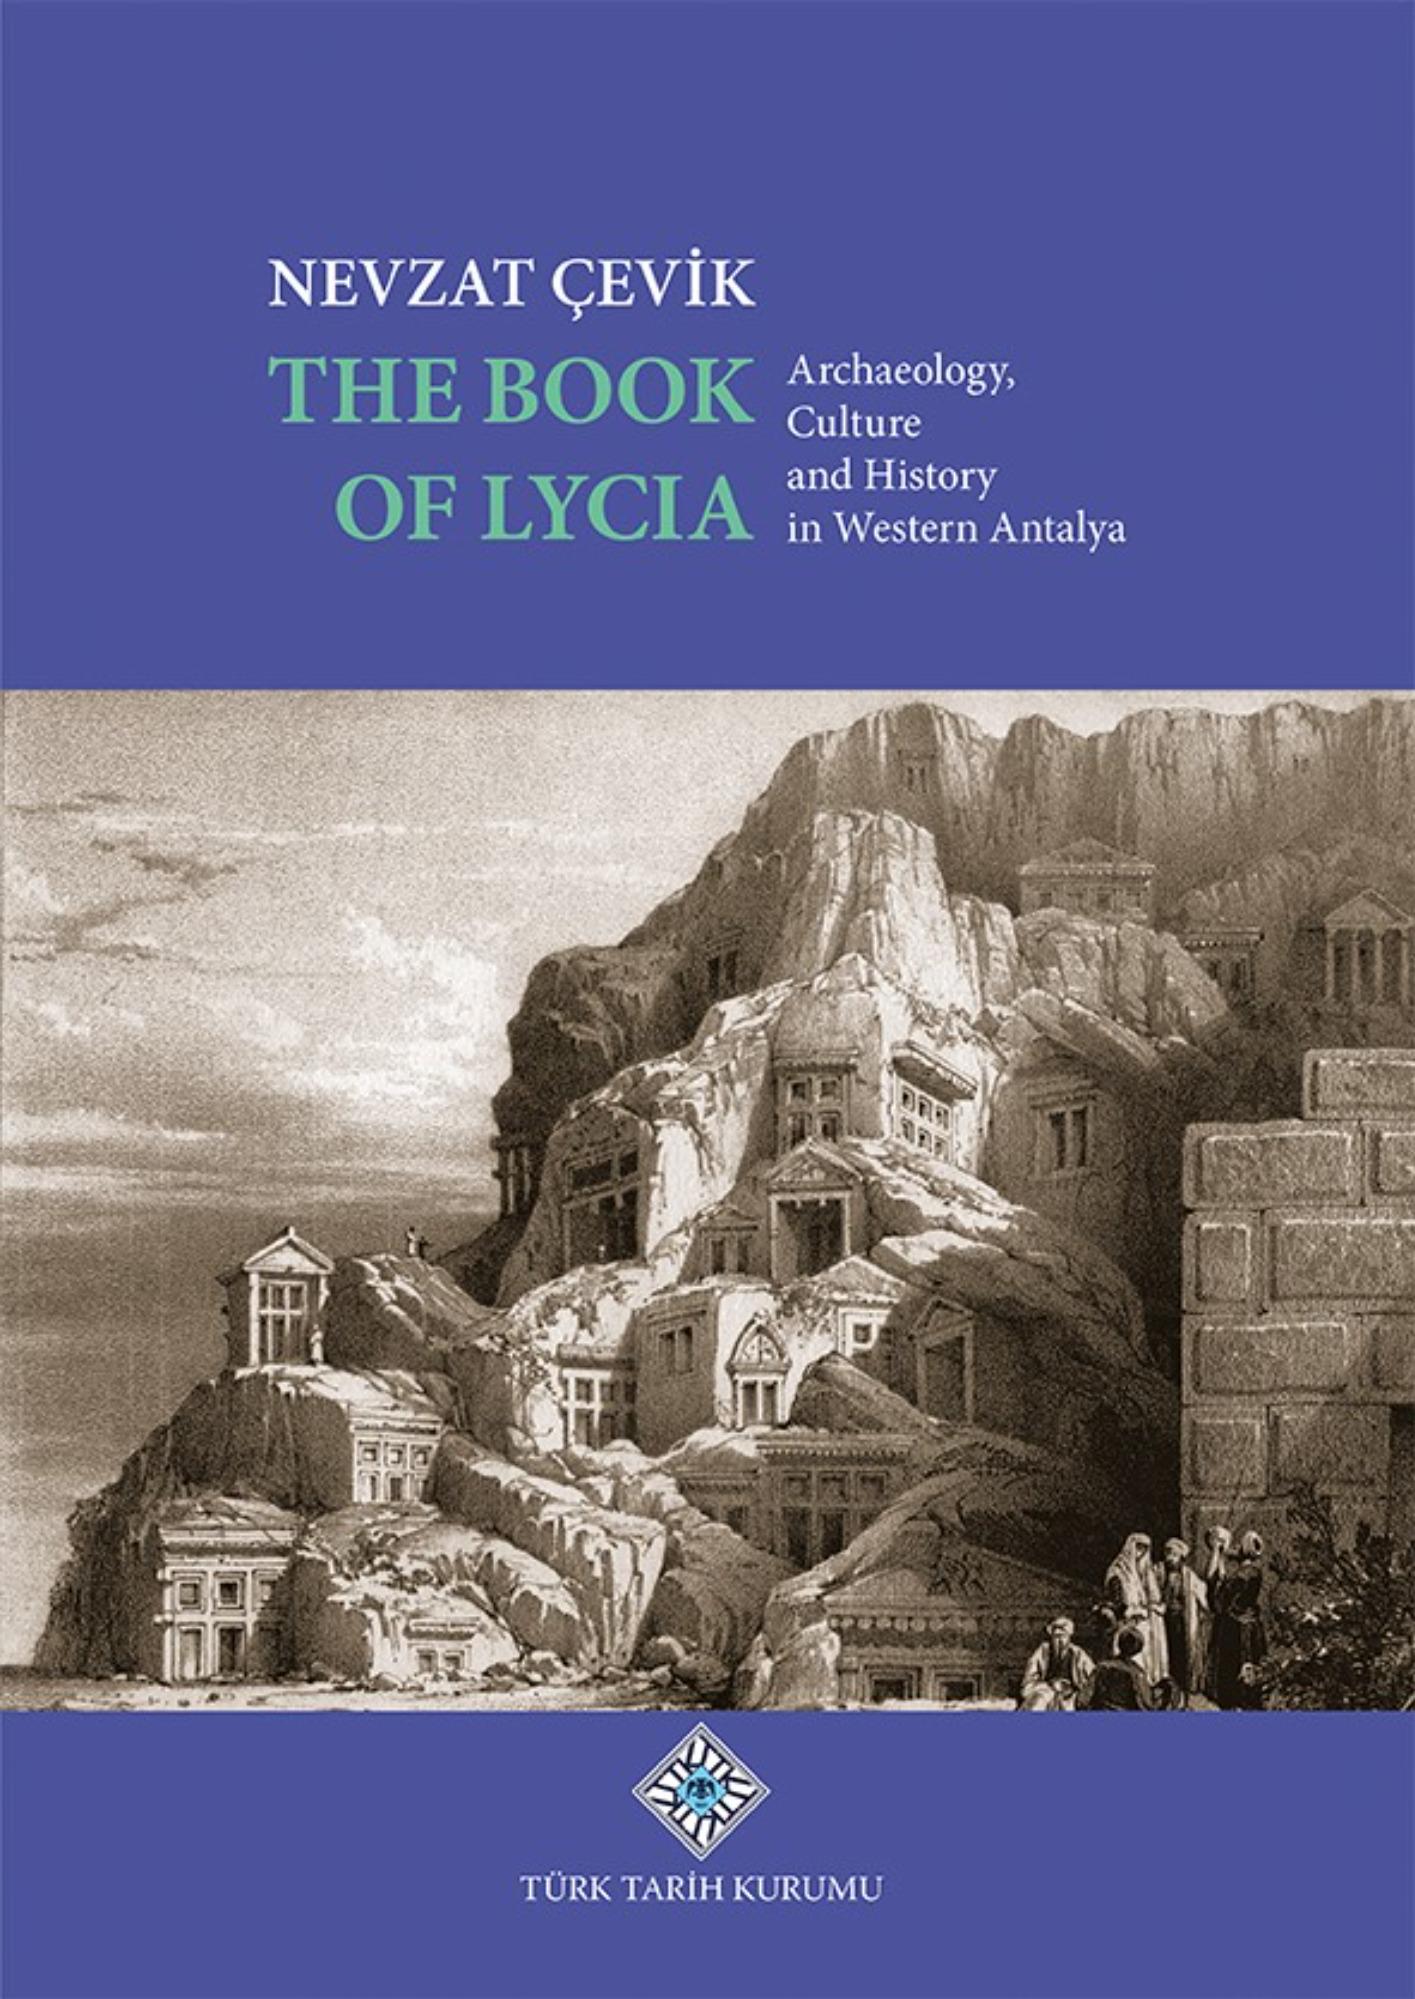 Çevik, Nevzat : The Book of Lycia. Archaeology, Culture and History in Western Antalya